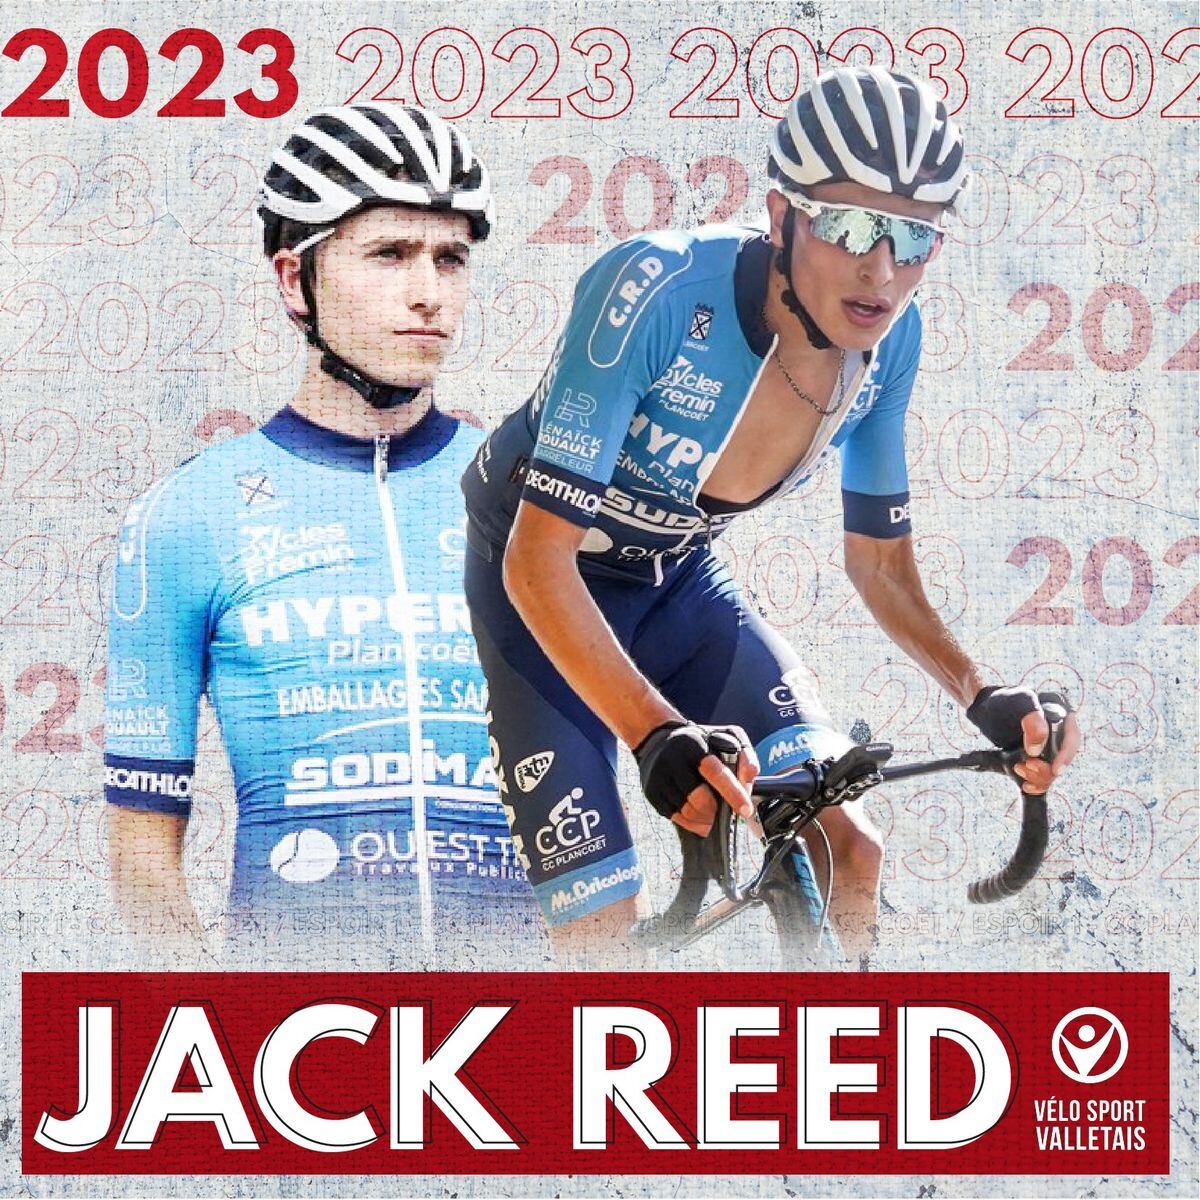 Velo Sport Valletais have announced Jack Reed on their roster for next year. (31283903)